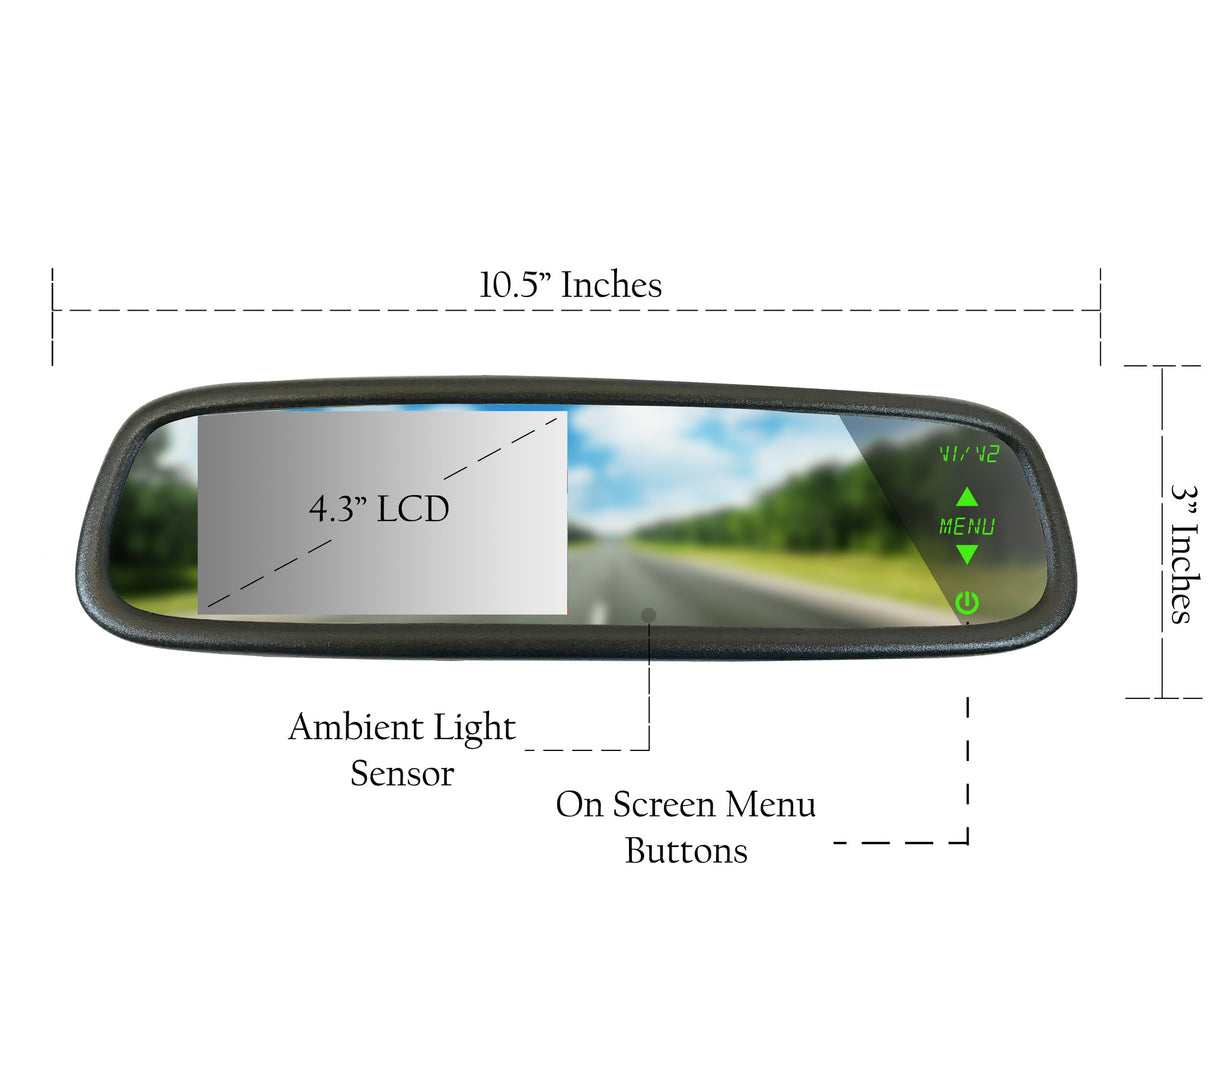 Master Tailgaters Sleek Rear View Mirror with Ultra Bright 4.3" Auto Adjusting Brightness LCD - Universal Fit - Master Tailgaters